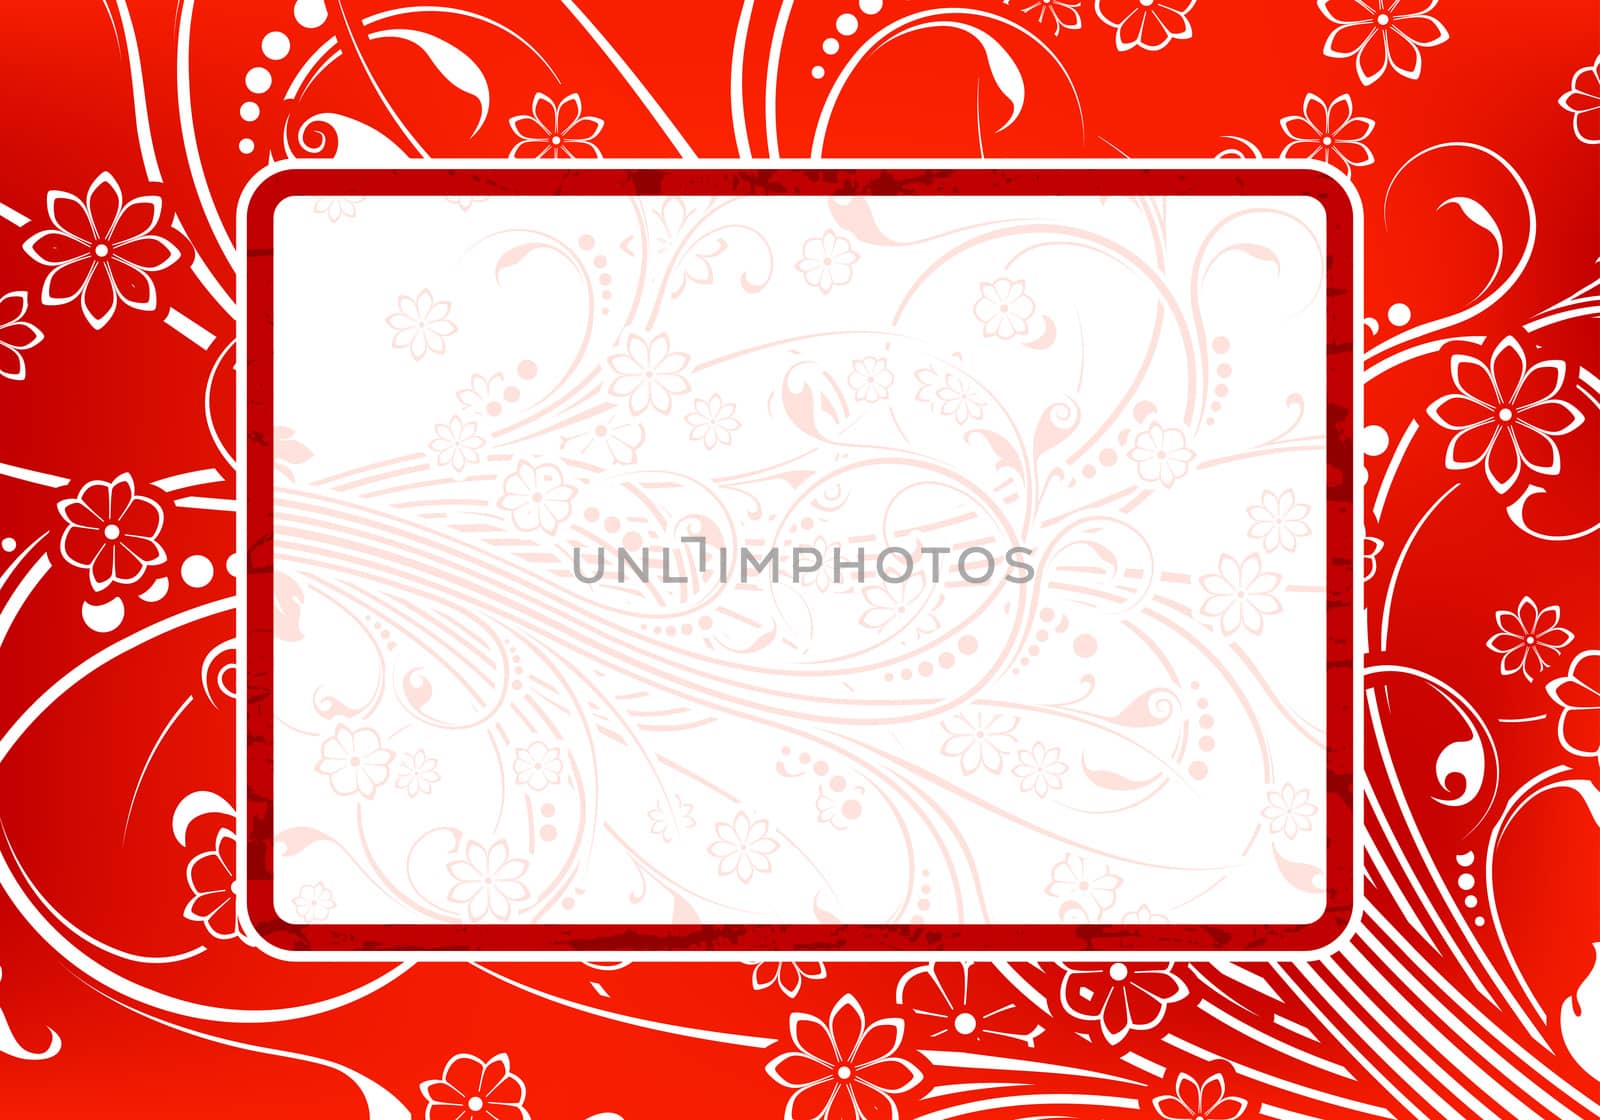 Abstract grunge painted background with floral scrolls and frame vector illustration